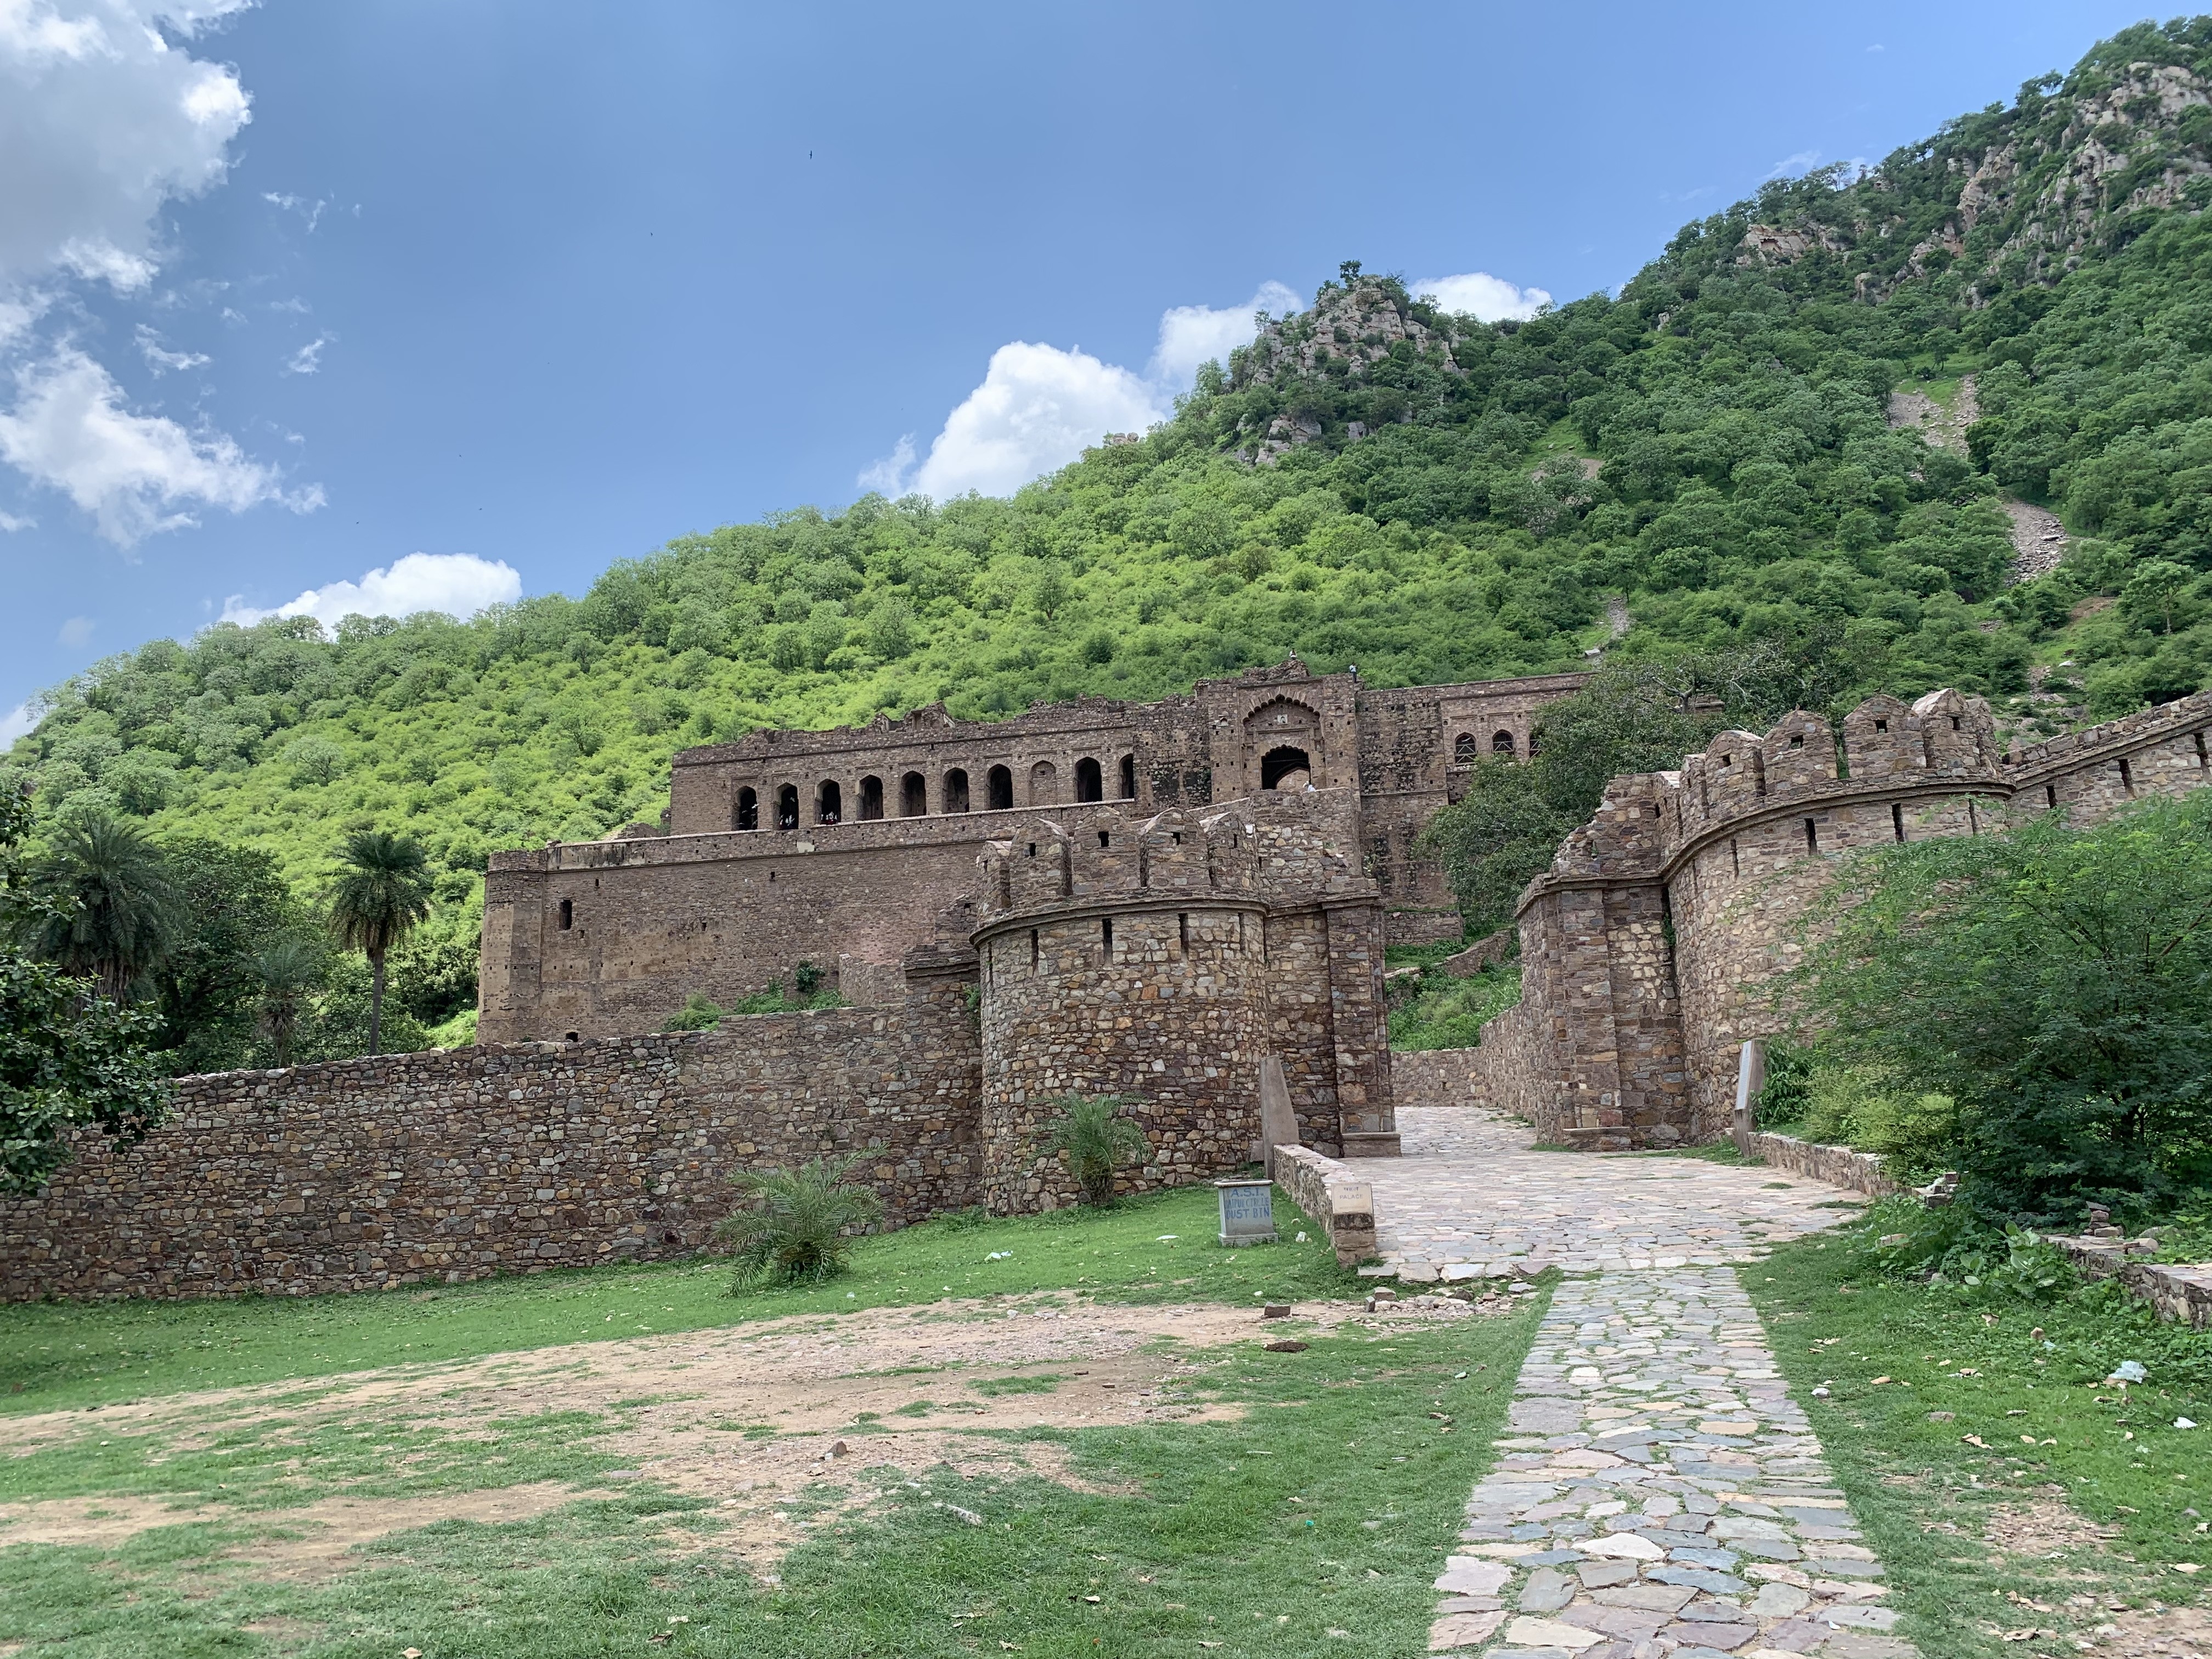 Bhangarh Fort in Rajasthan